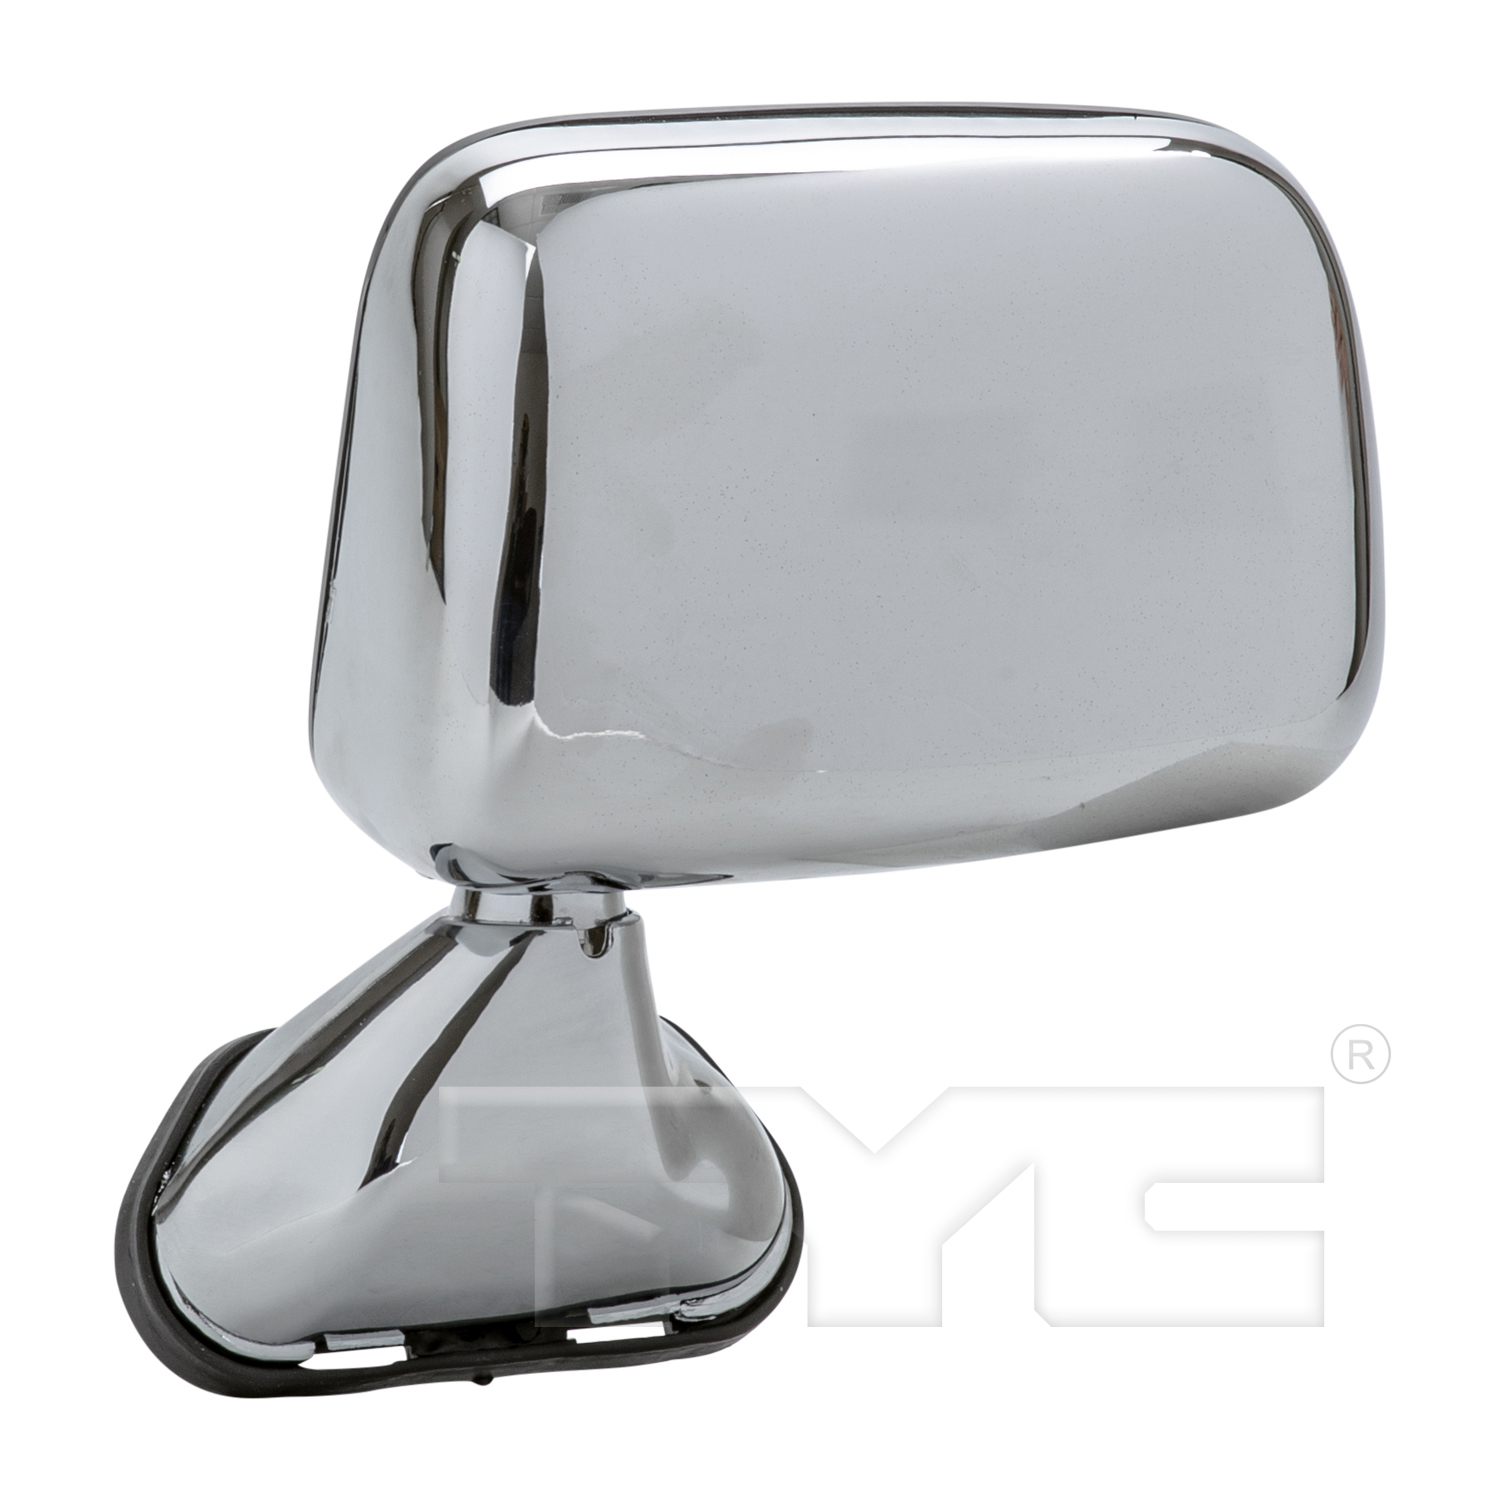 Aftermarket MIRRORS for TOYOTA - PICKUP, PICKUP,89-95,LT Mirror outside rear view